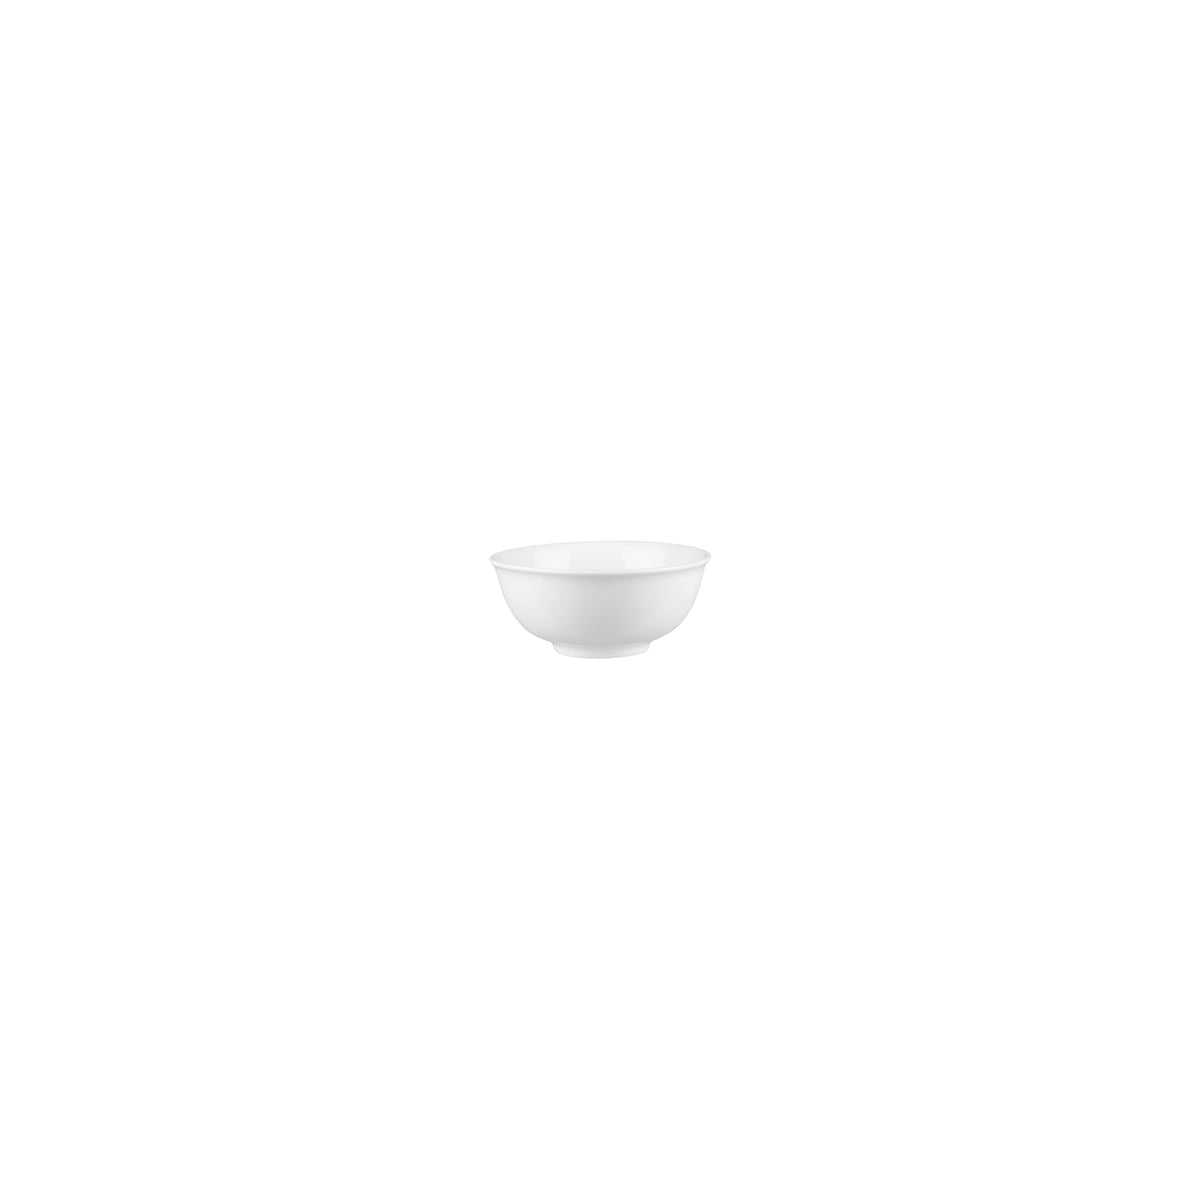 Bowl - 160Ml, Nano from Rak Porcelain. made out of Porcelain and sold in boxes of 12. Hospitality quality at wholesale price with The Flying Fork! 